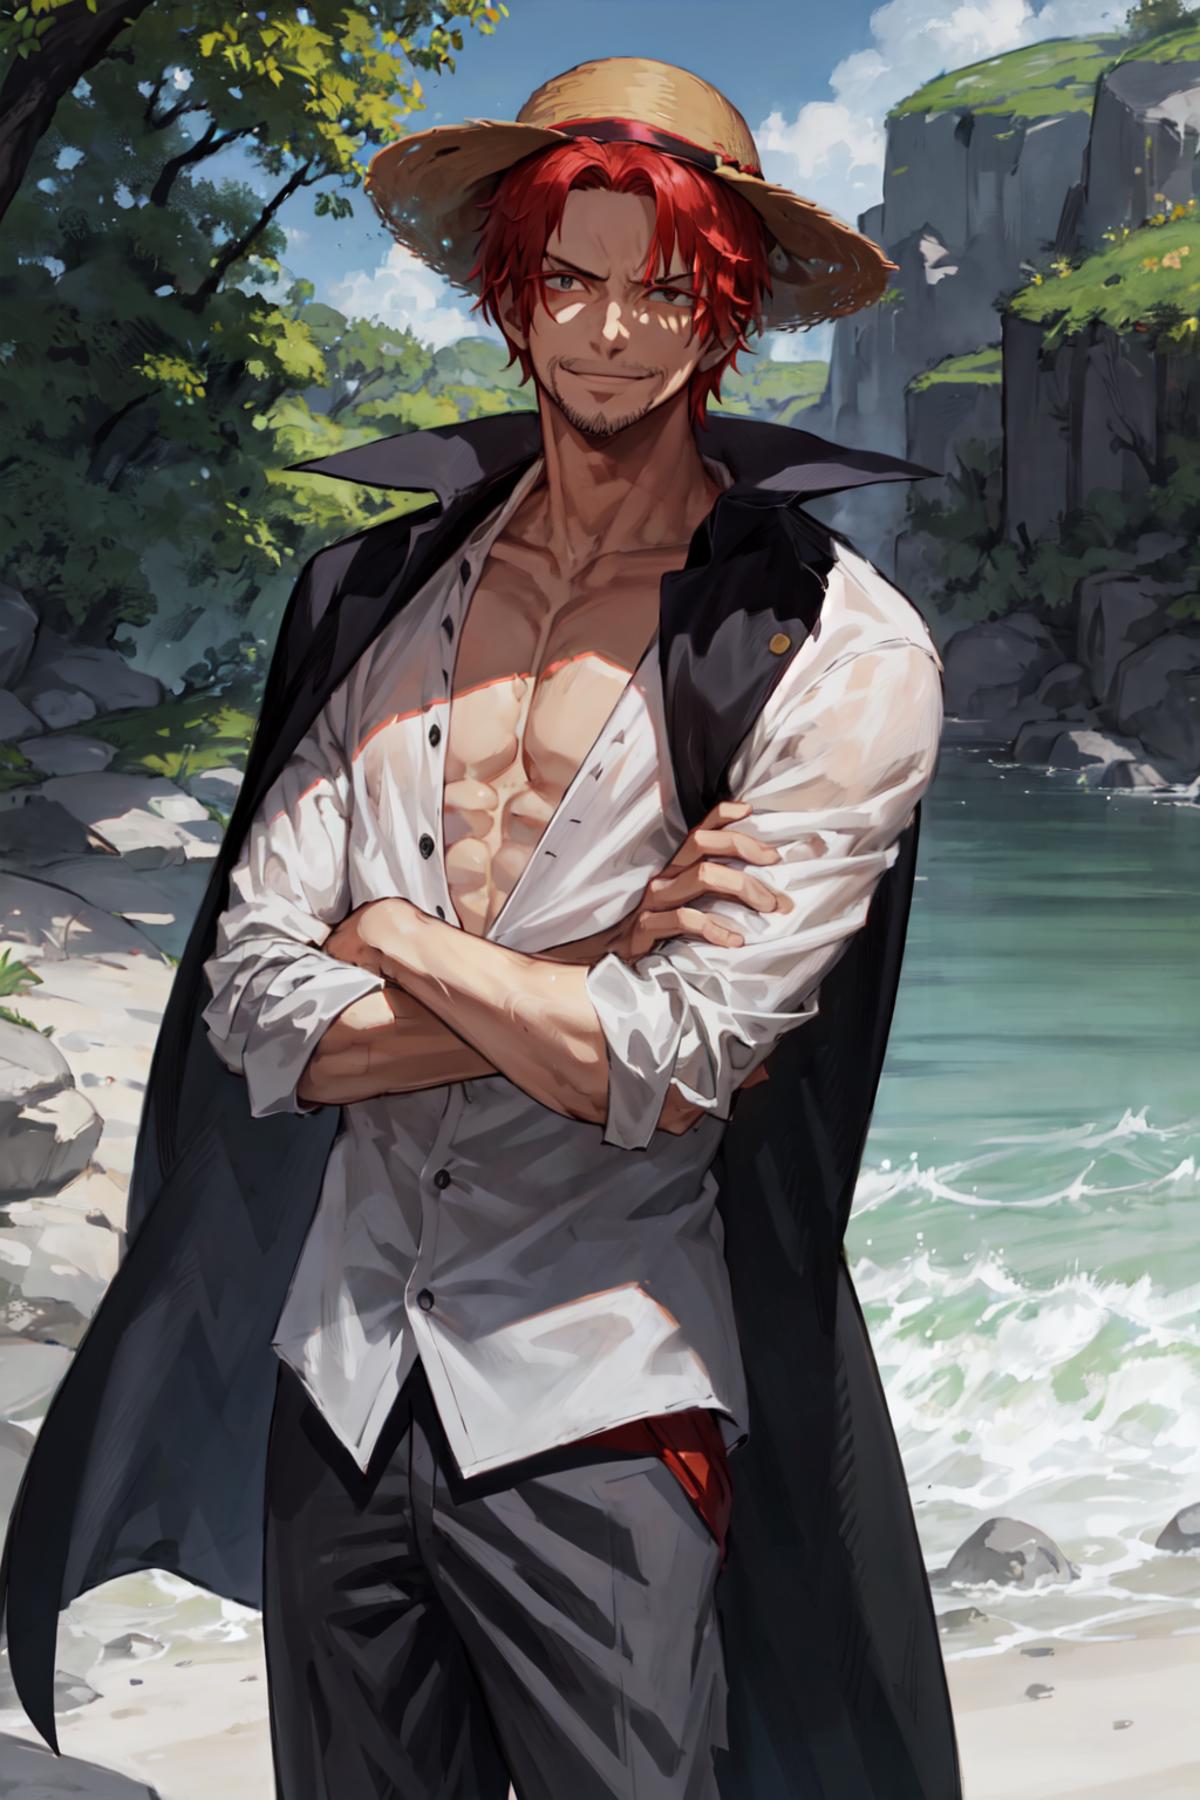 Shanks | One Piece image by Cooler_Rider